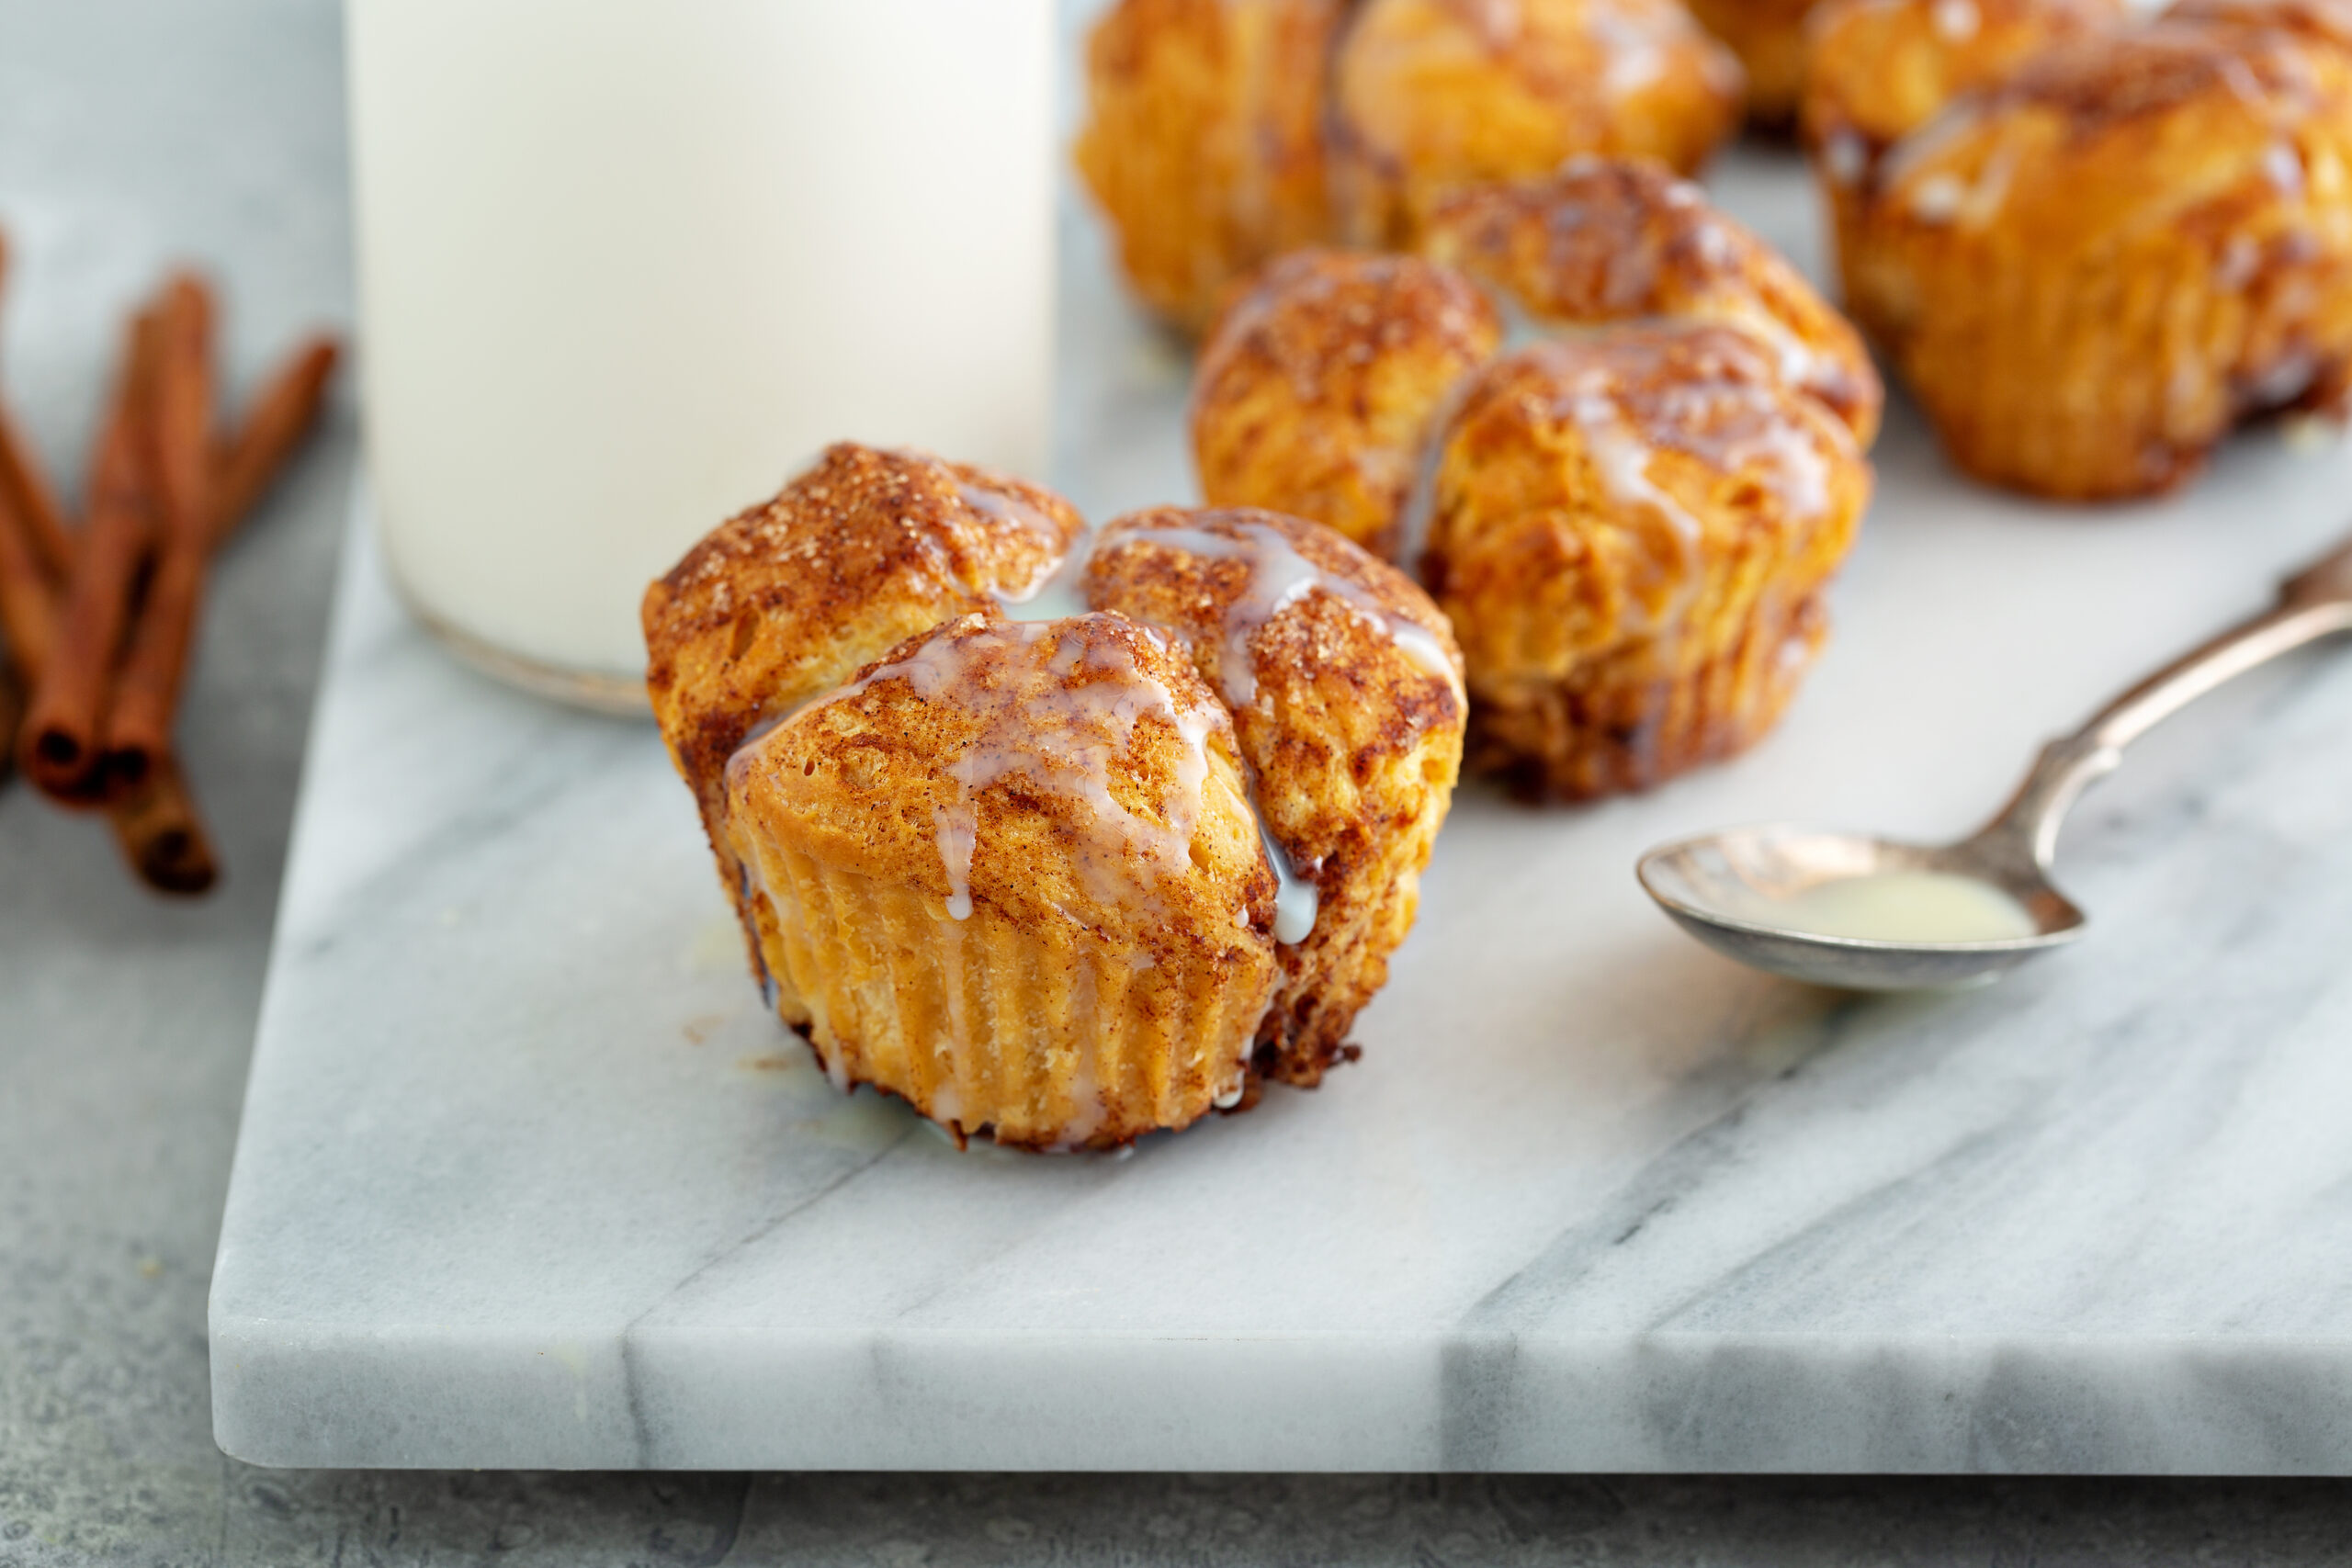 Cinnamon Monkey Bread Muffins Recipe; these sweet and fluffy pull apart muffins, bursting with cinnamon flavors will be one your family asks for every holiday season!